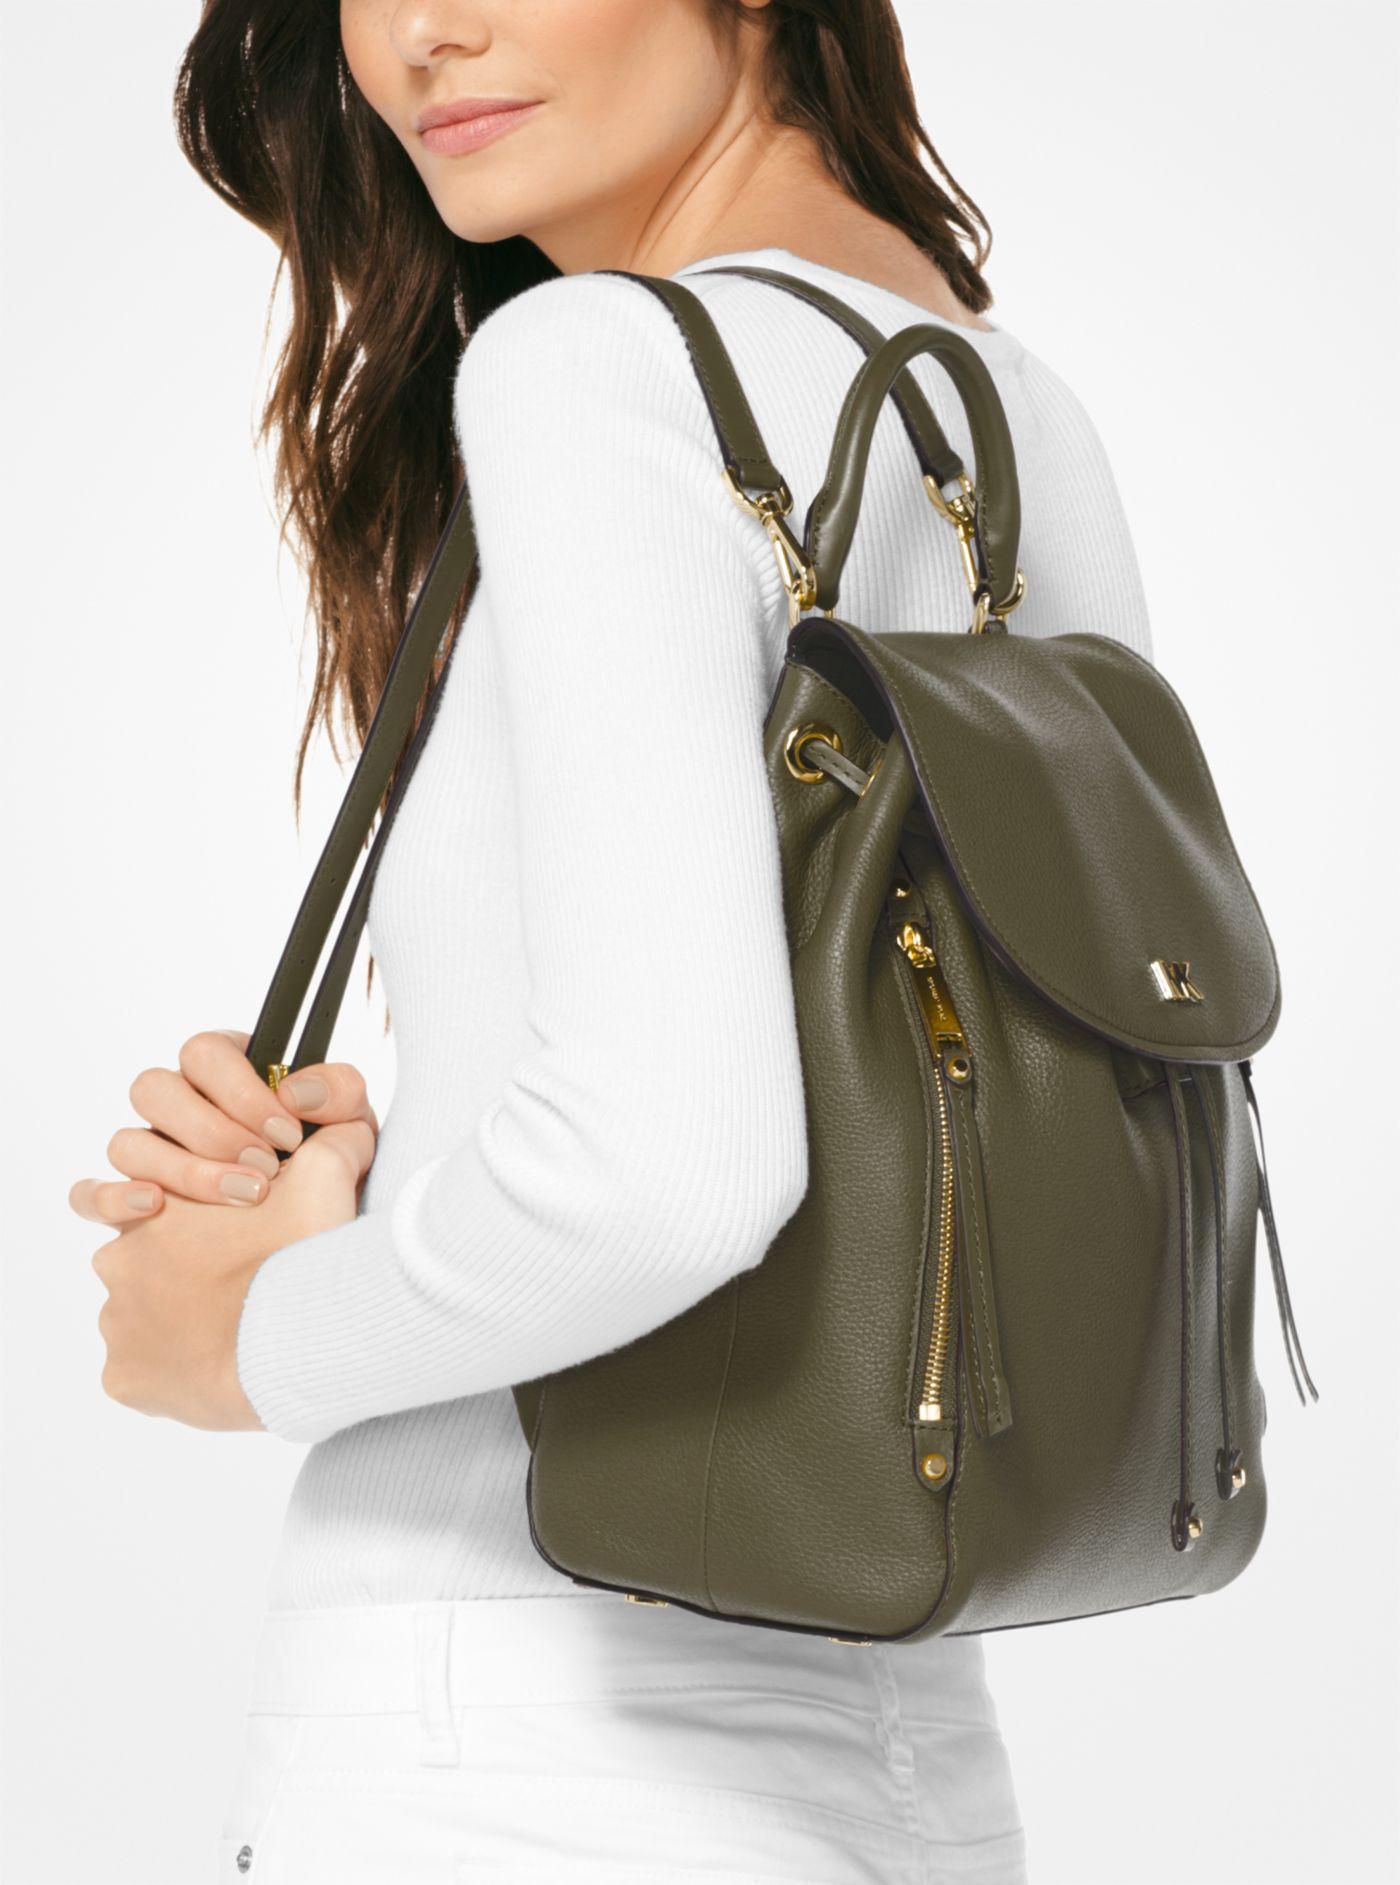 Michael Kors Evie Medium Leather Backpack in Green | Lyst